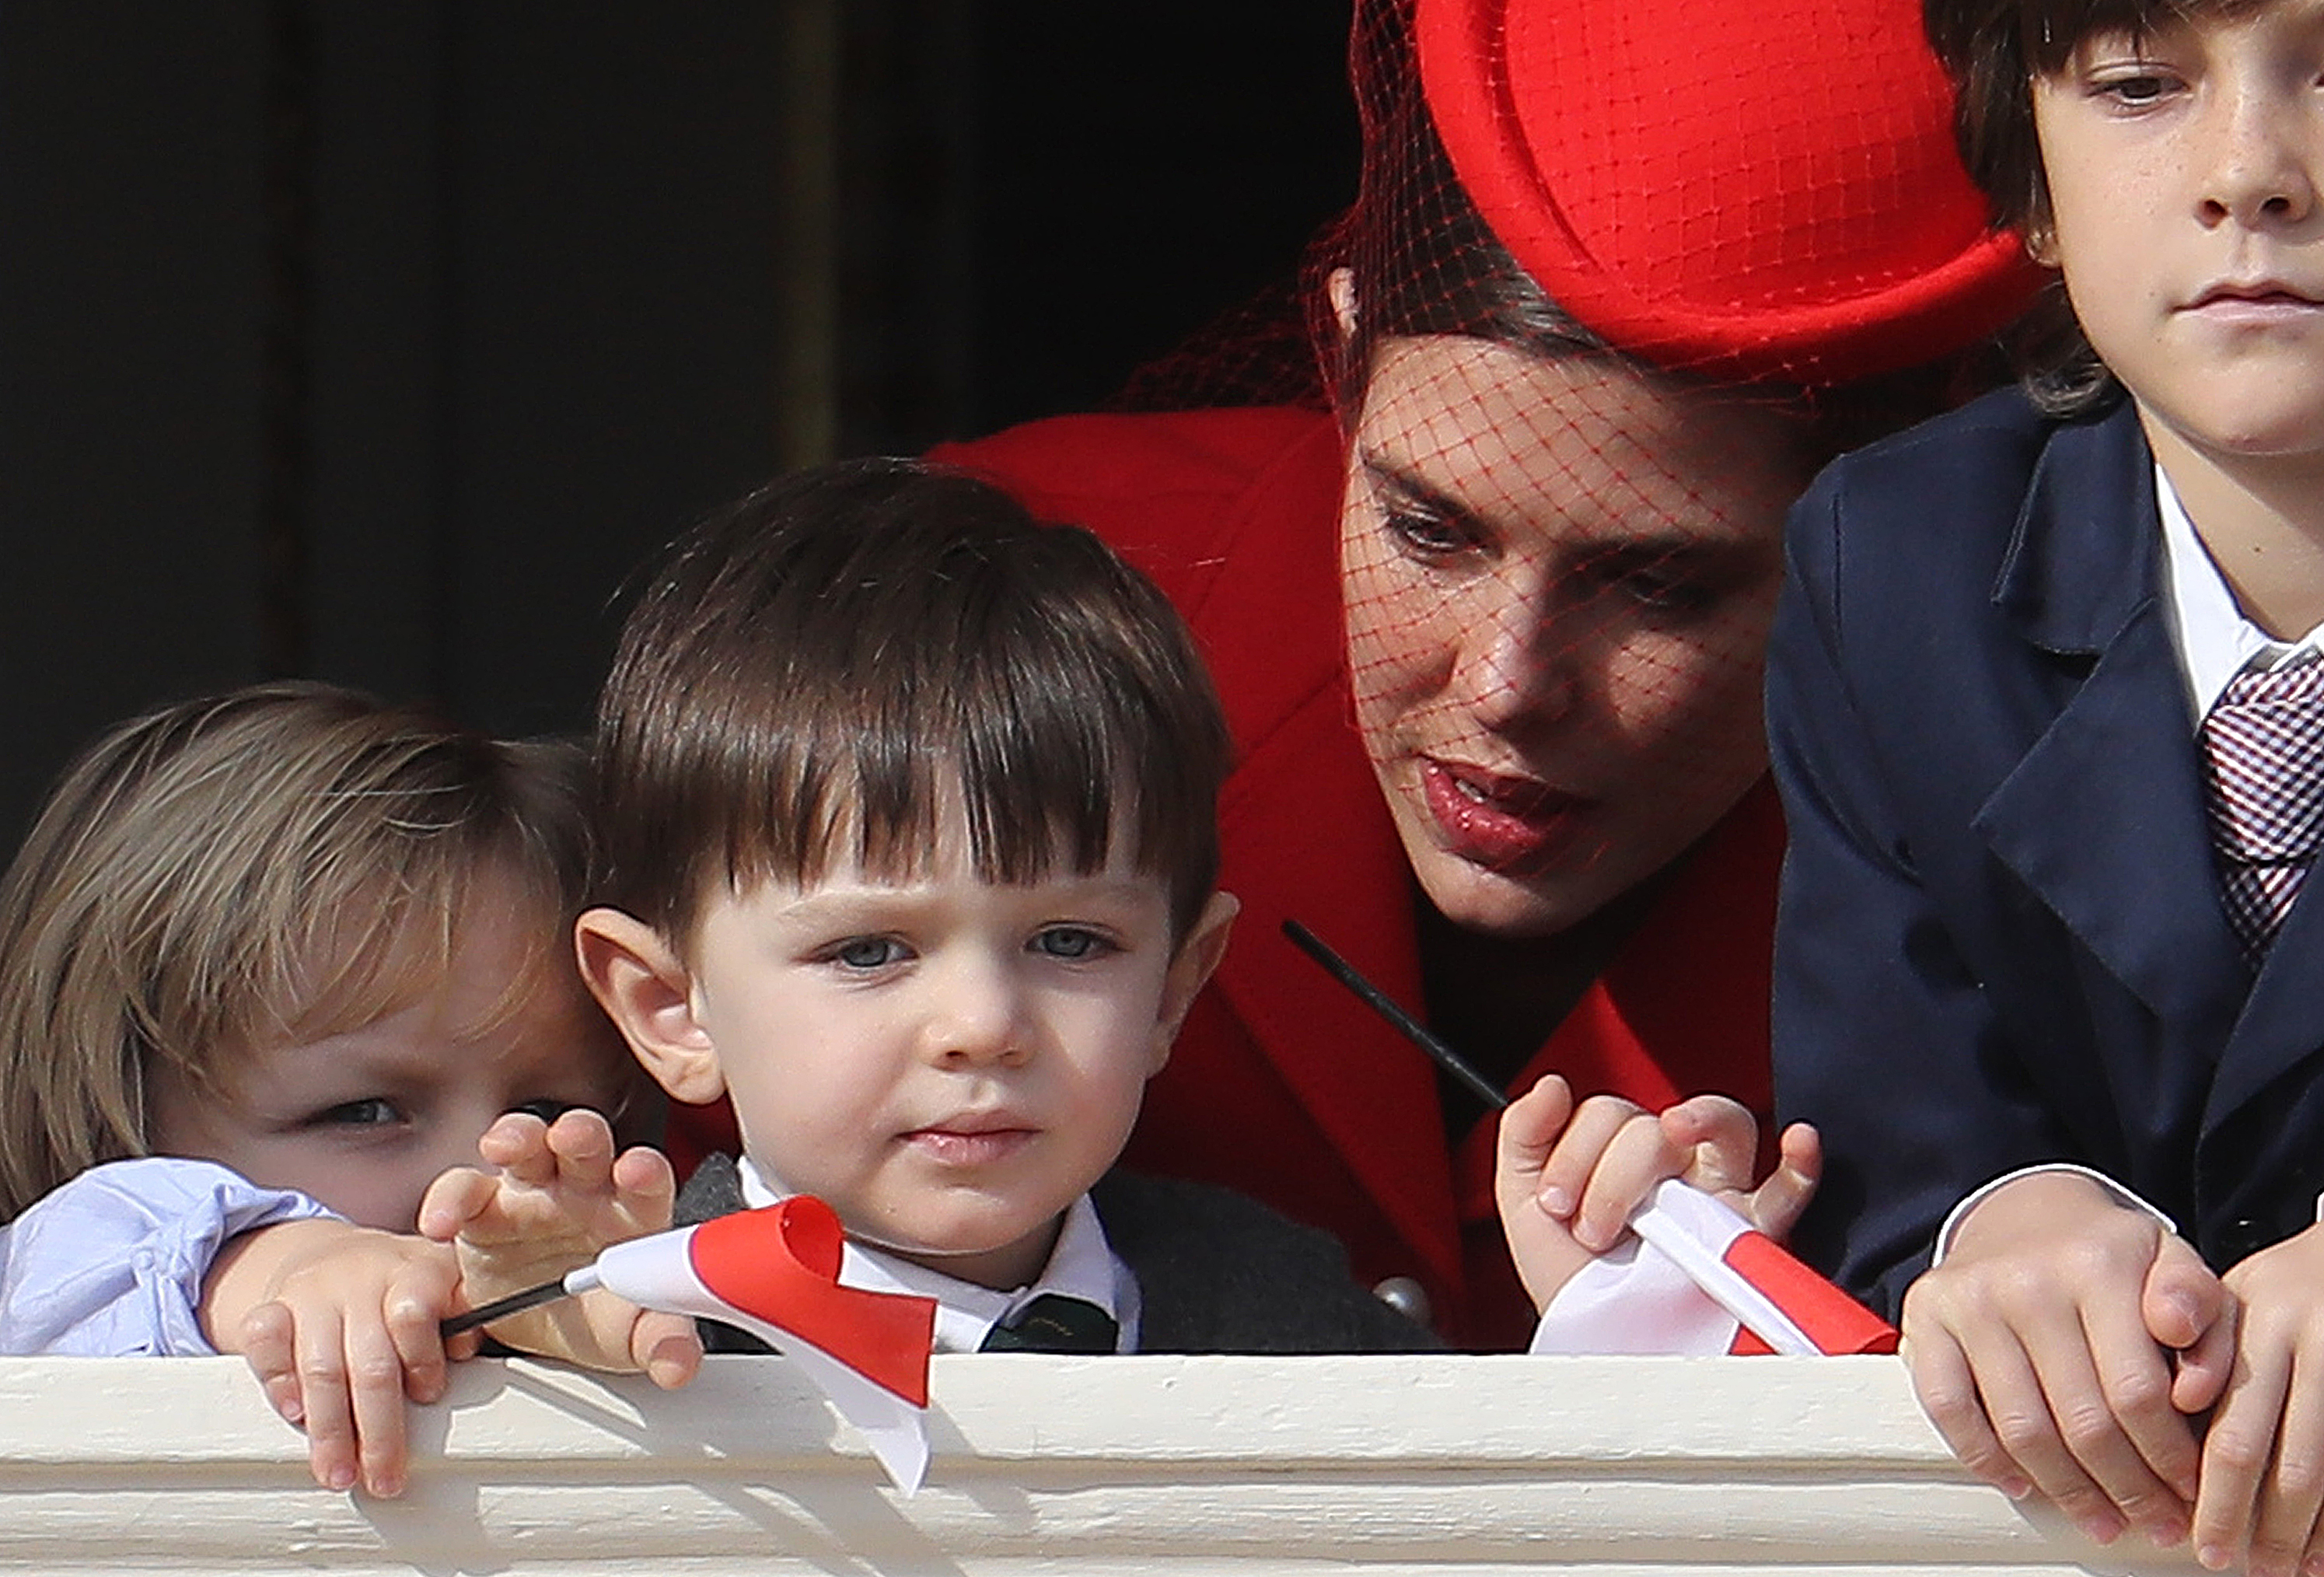 Monaco's Princess Charlotte Casiraghi (2ndR) and her son Raphael (2ndL) appear on the balcony of the Monaco Palace during the celebrations marking Monaco's National Day, on November 19, 2016 in Monaco.   / AFP PHOTO / VALERY HACHE